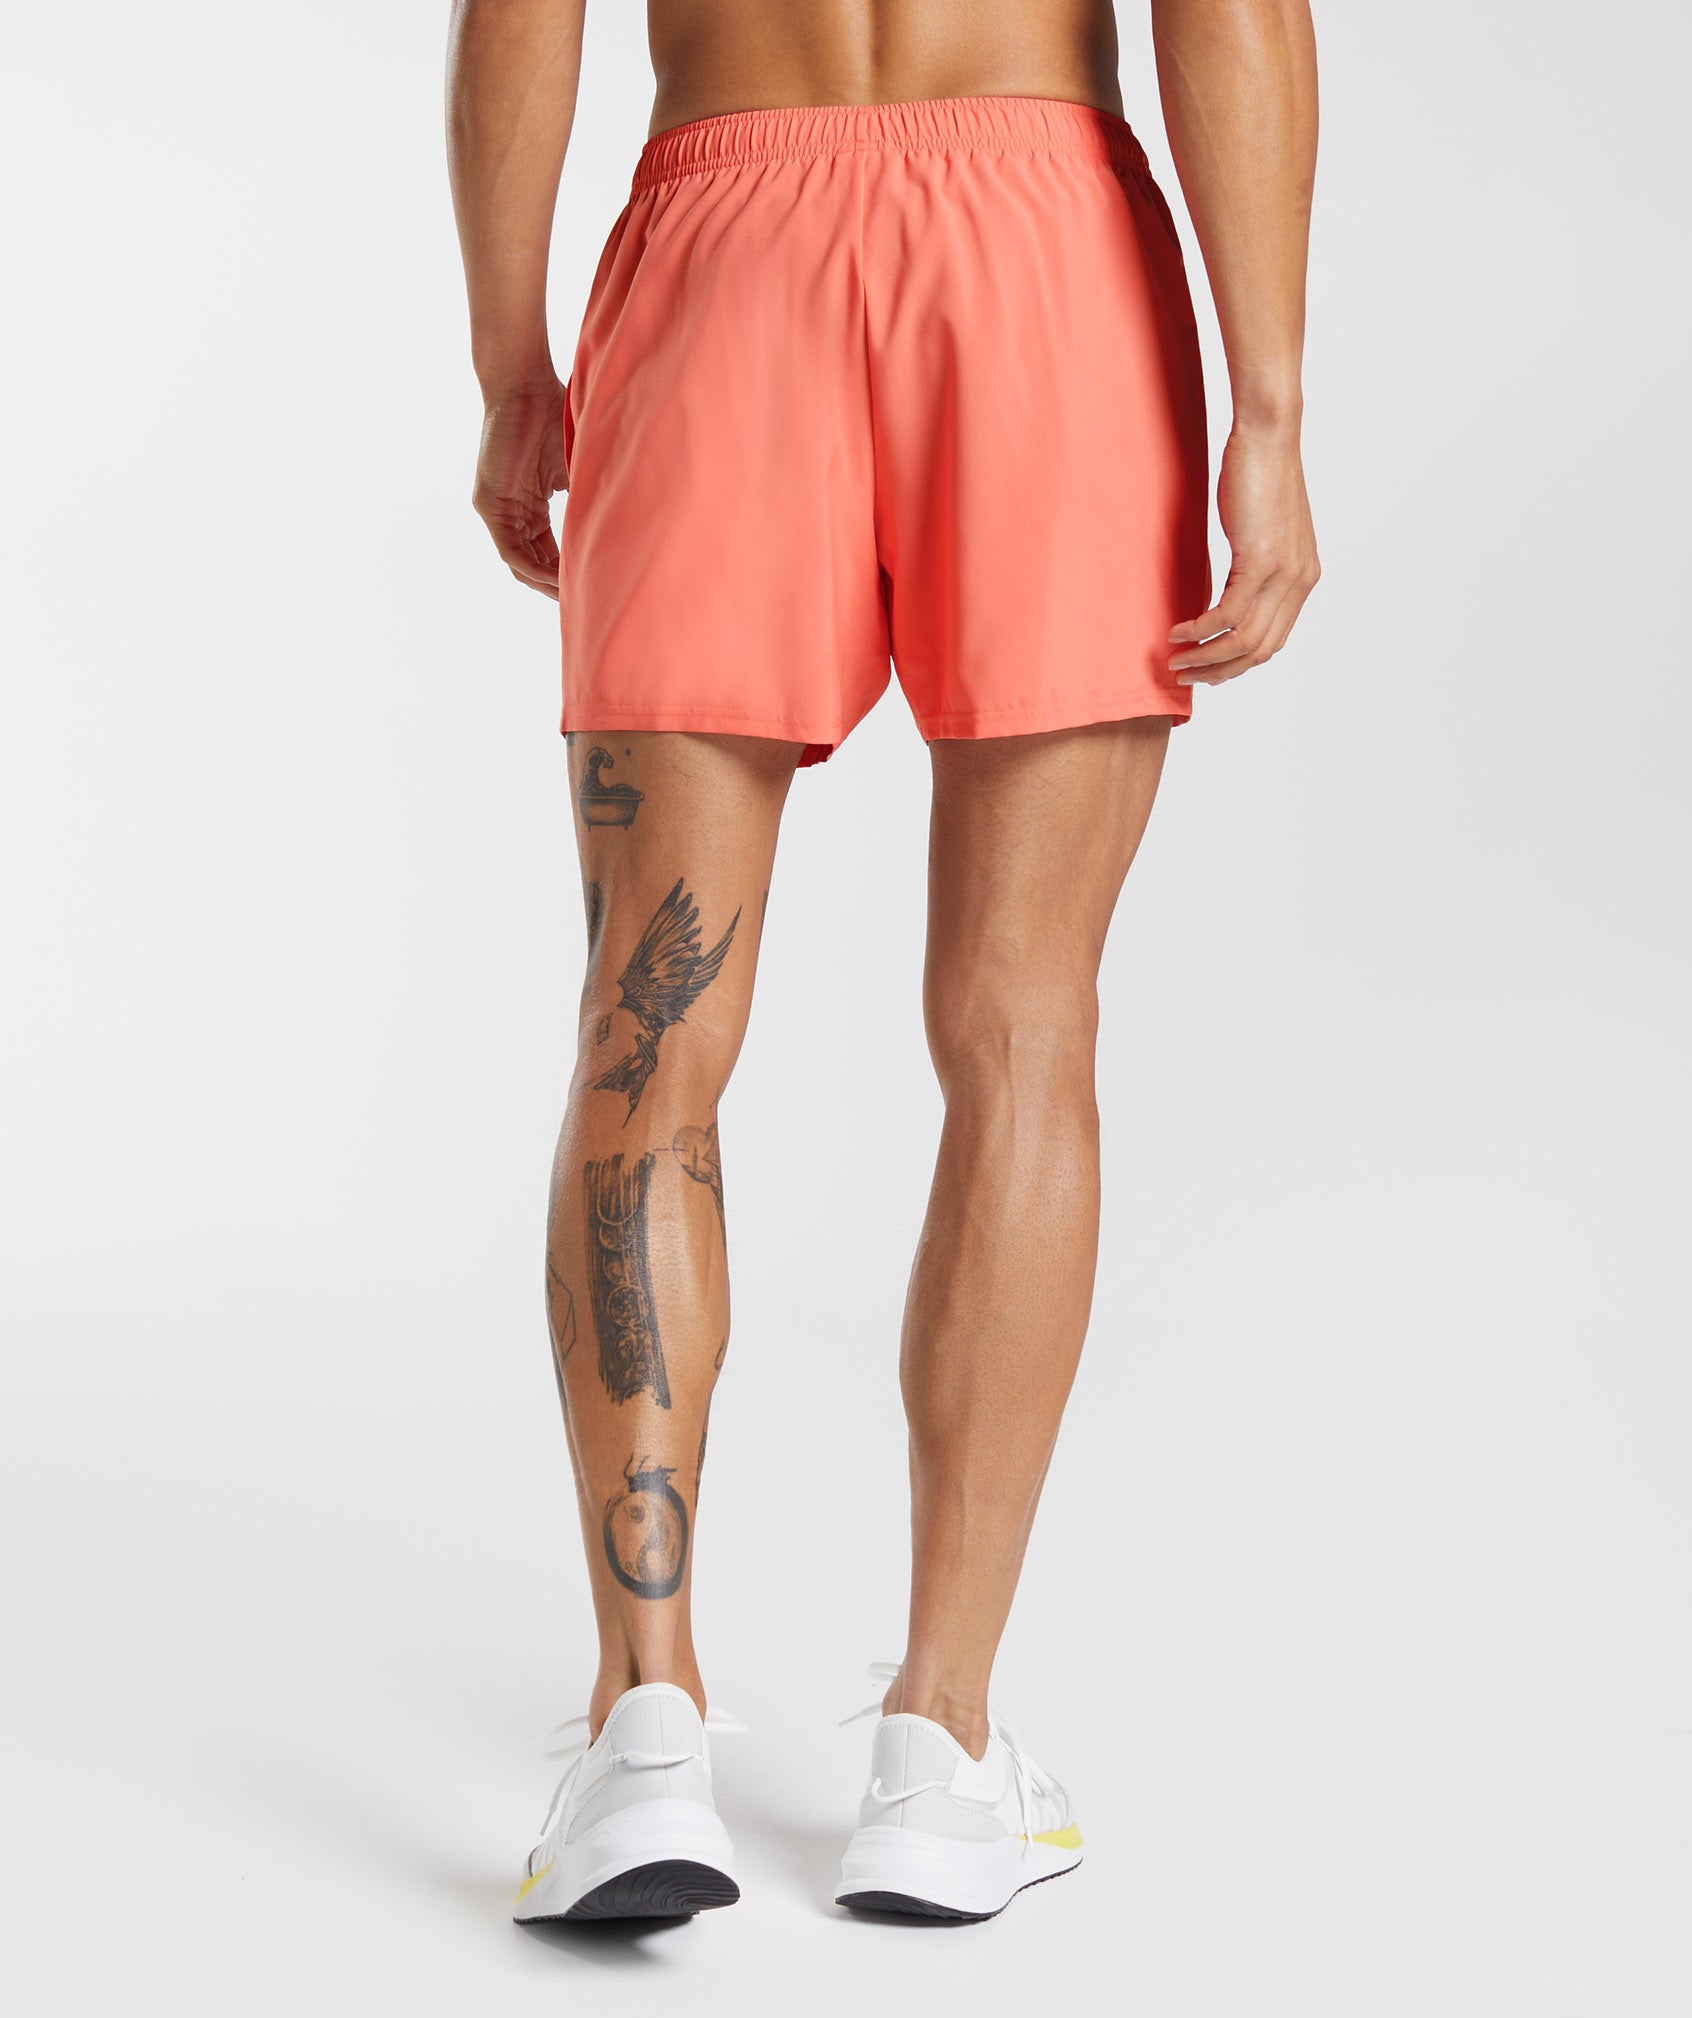 Arrival 5" Shorts in Aerospace Orange - view 2